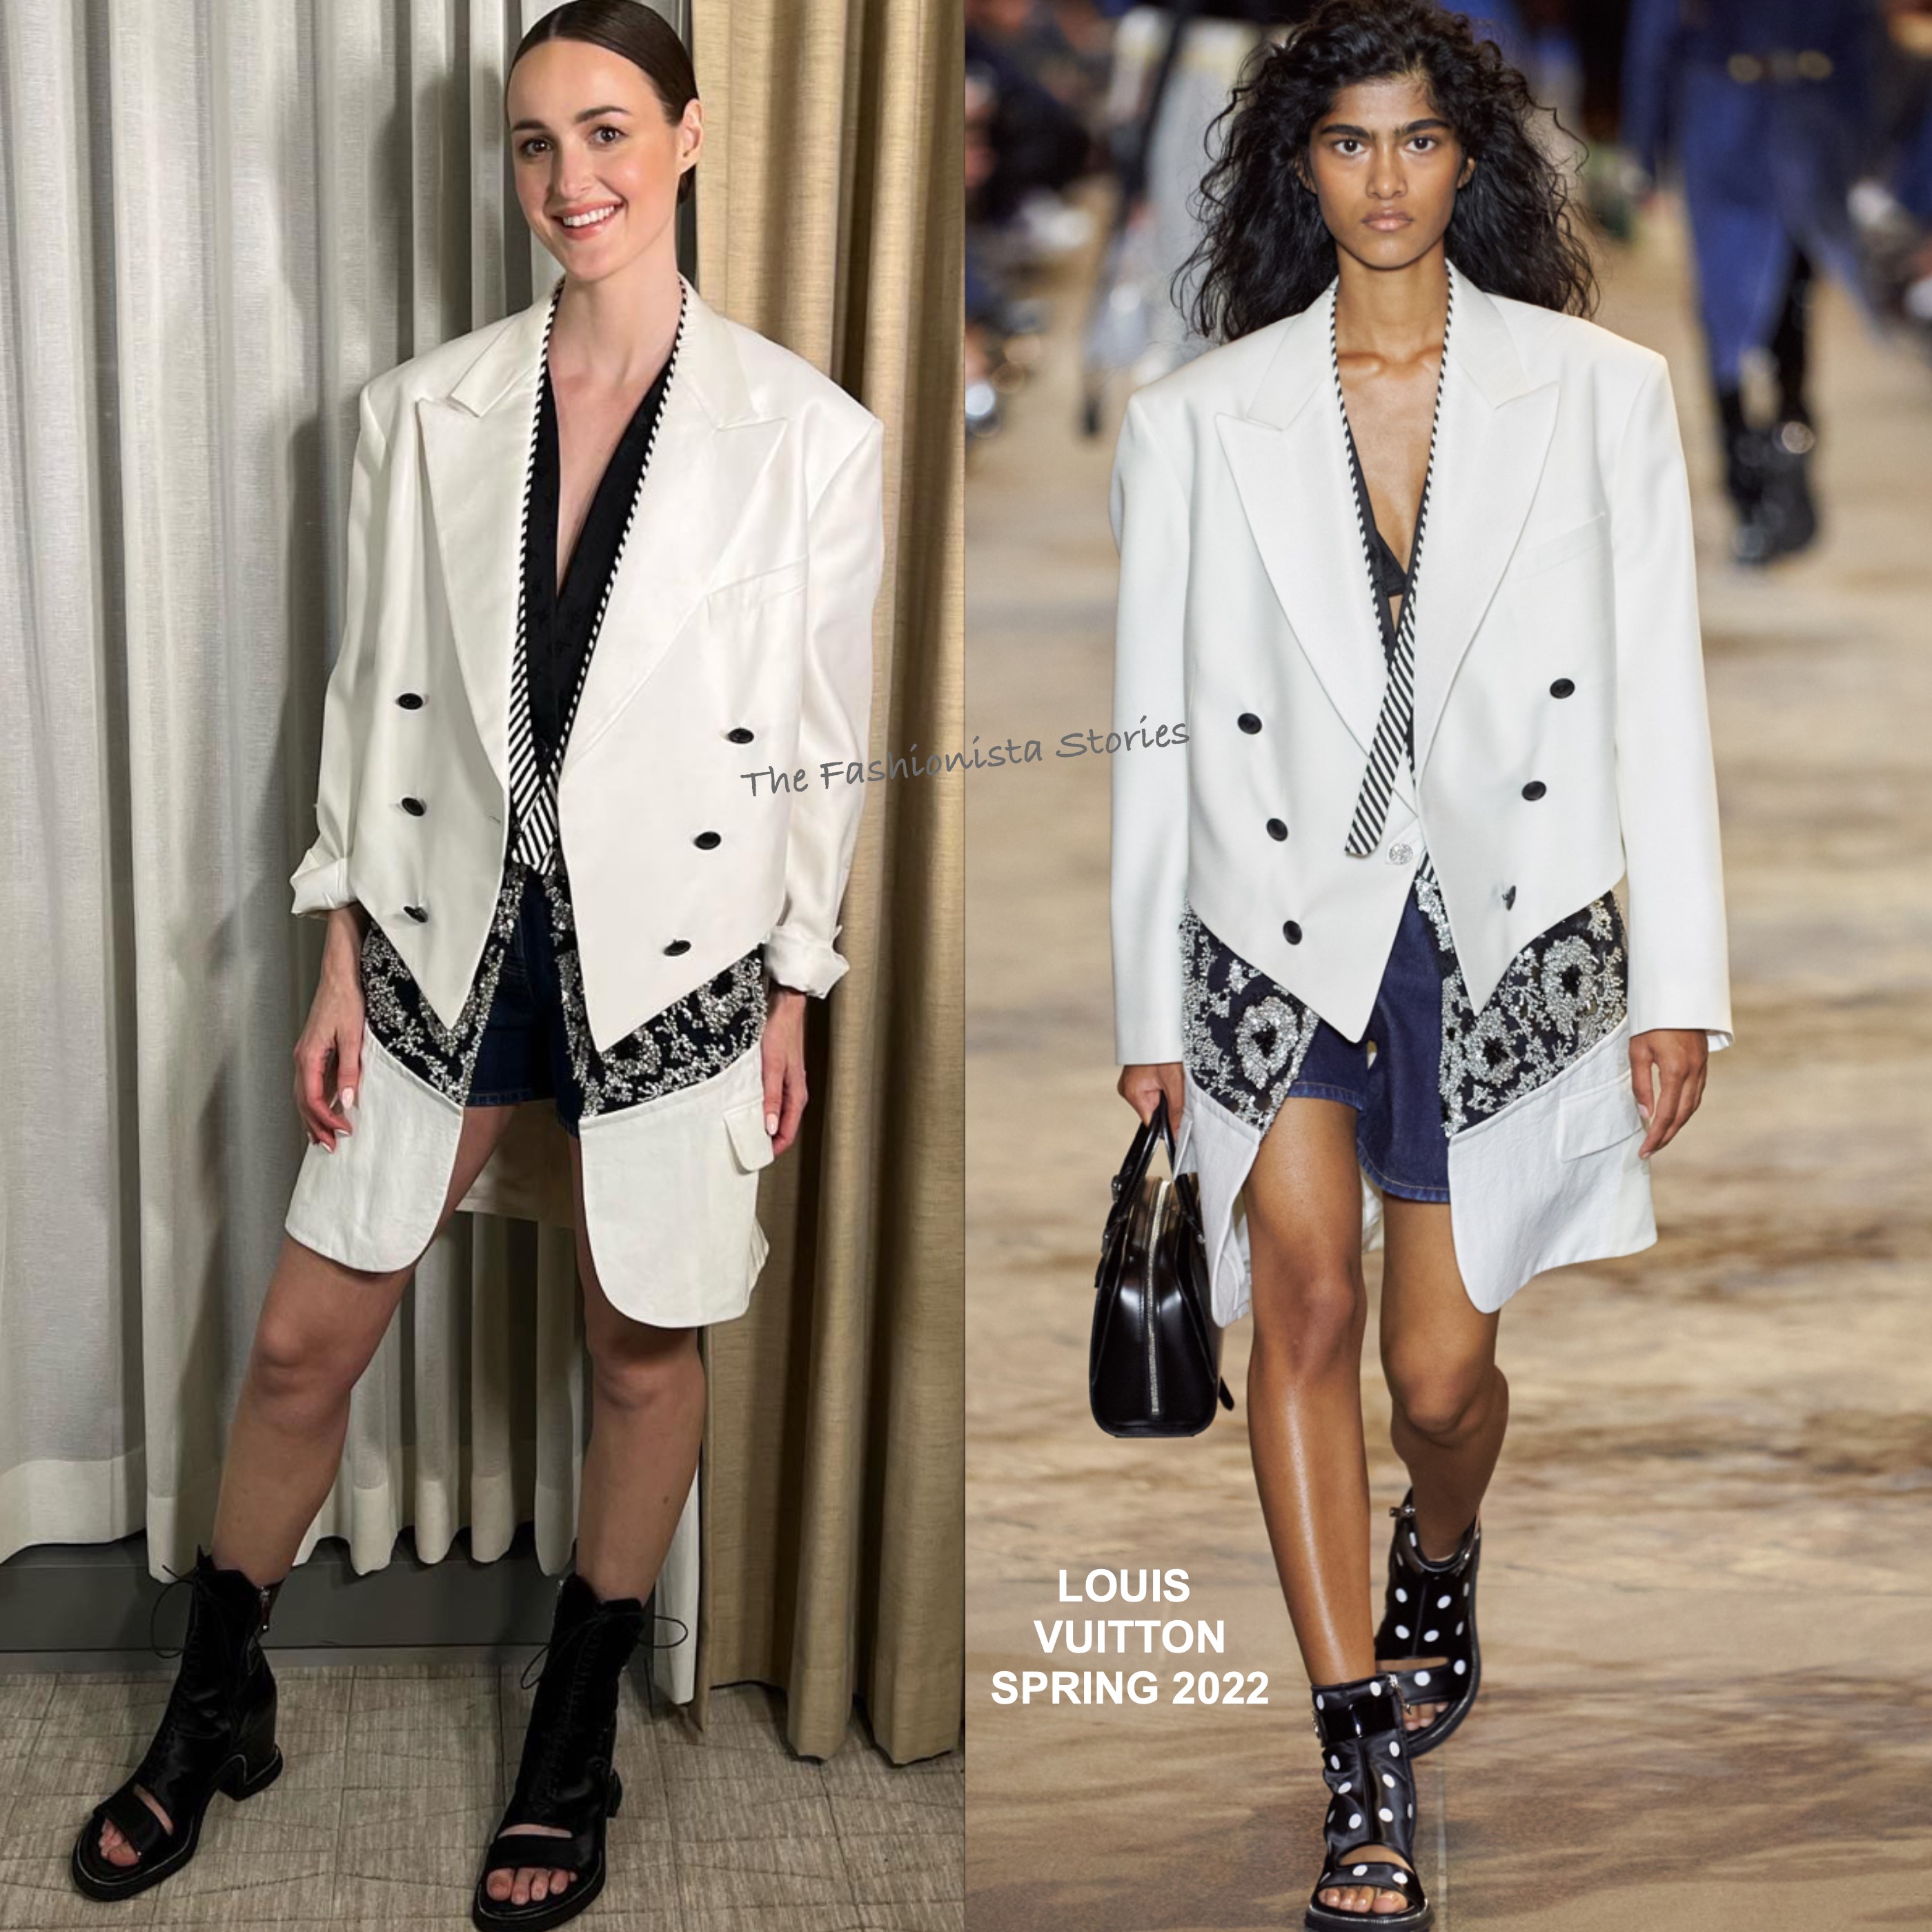 Instagram Style: Renate Reinsve in Louis Vuitton to Promote ''The